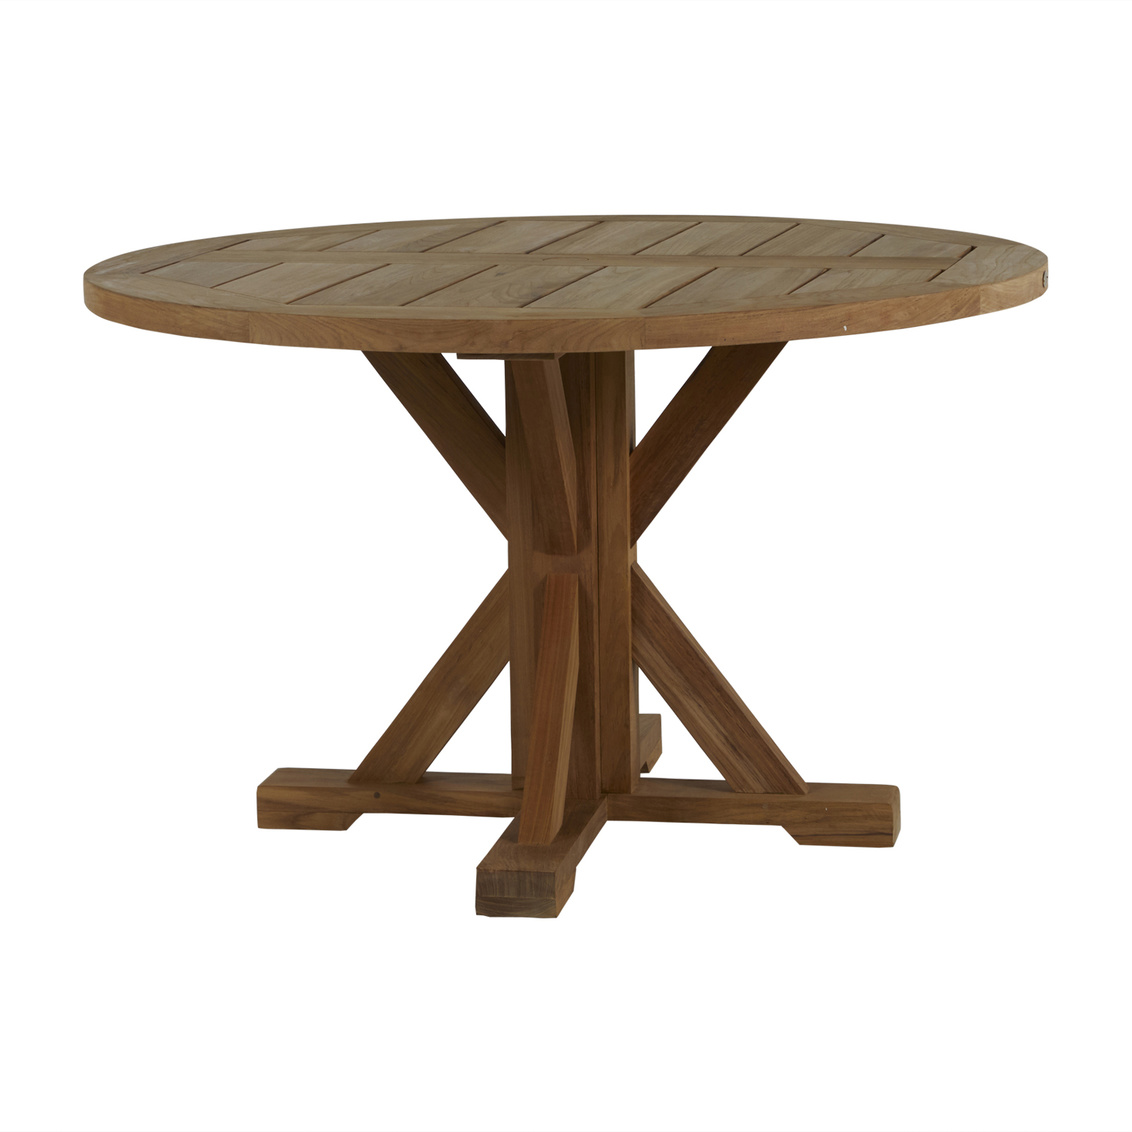 modena round dining table in natural teak (w/ hole) product image